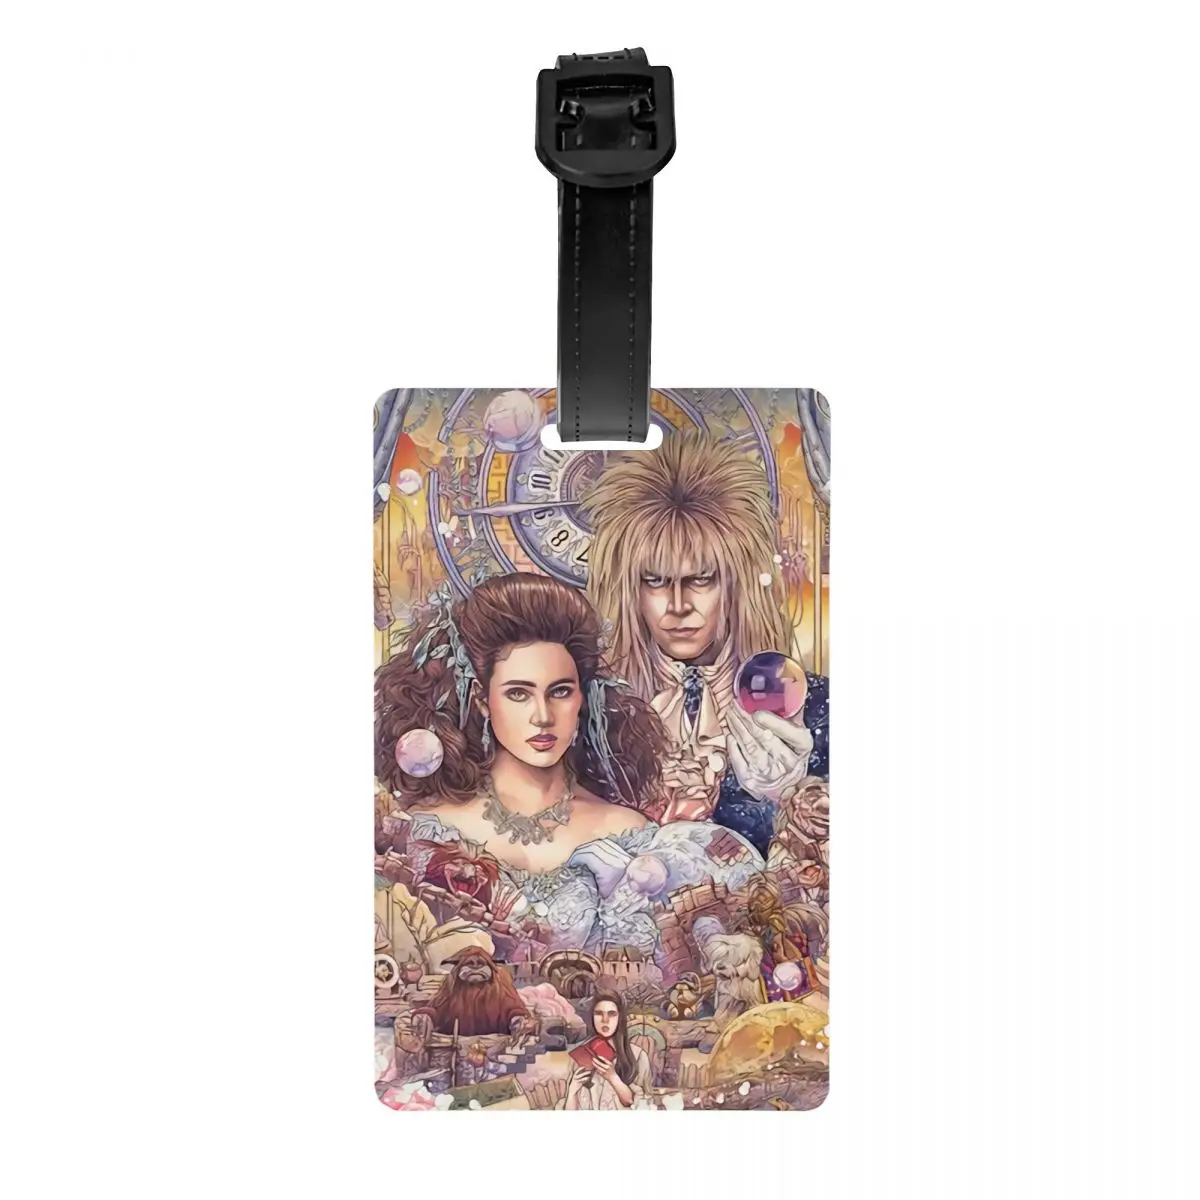 

Fantasy Film Labyrinth Luggage Tags for Suitcases Jareth The Goblin King Movie Privacy Cover ID Label